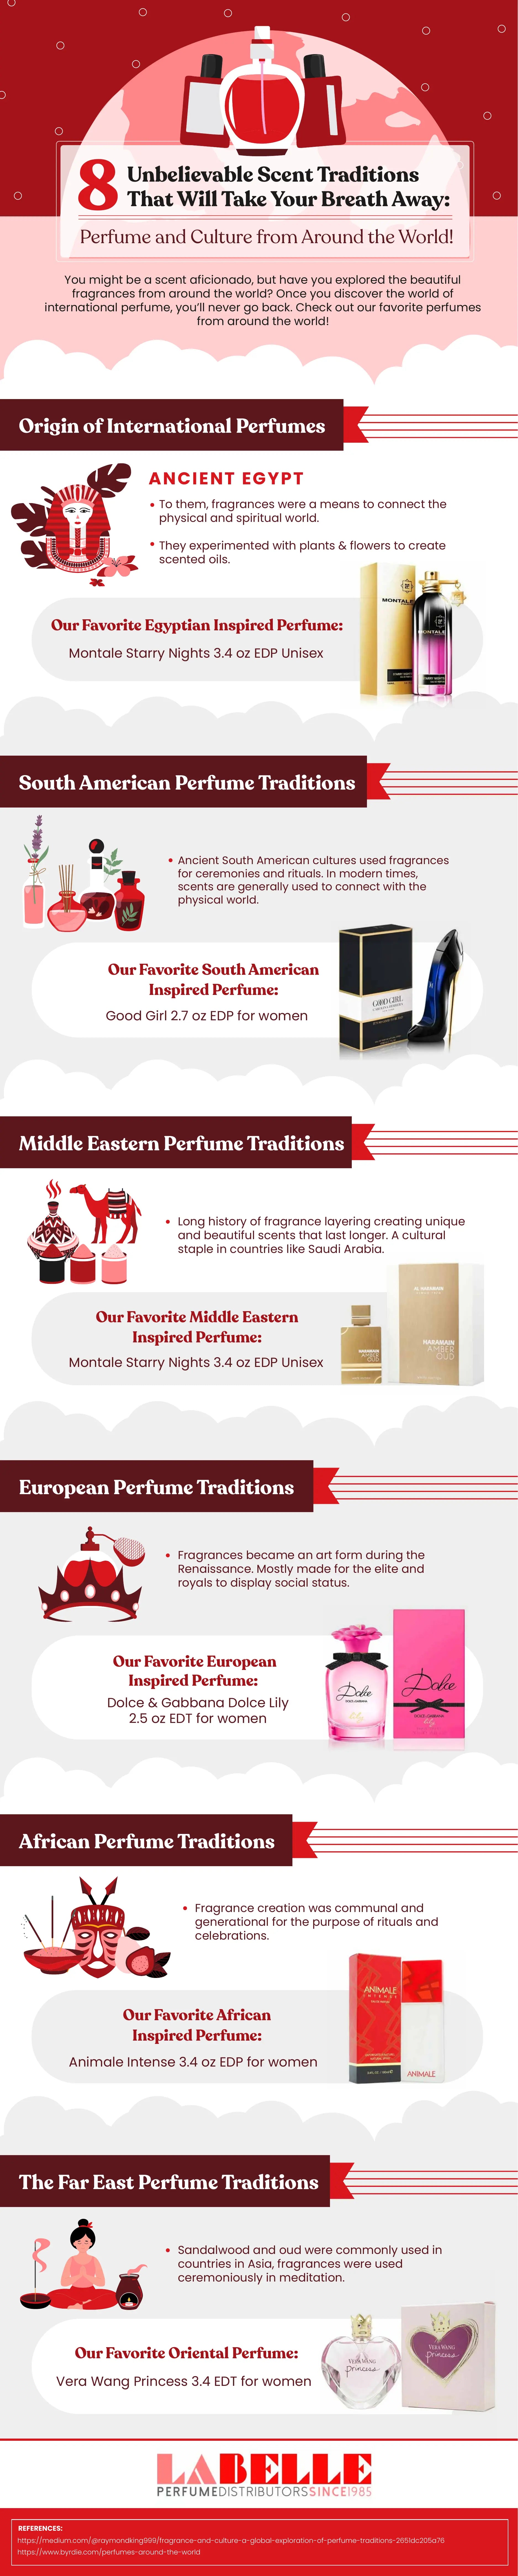 8 Unbelievable Scent Traditions That Will Take Your Breath Away: Perfume and Culture from Around the World!